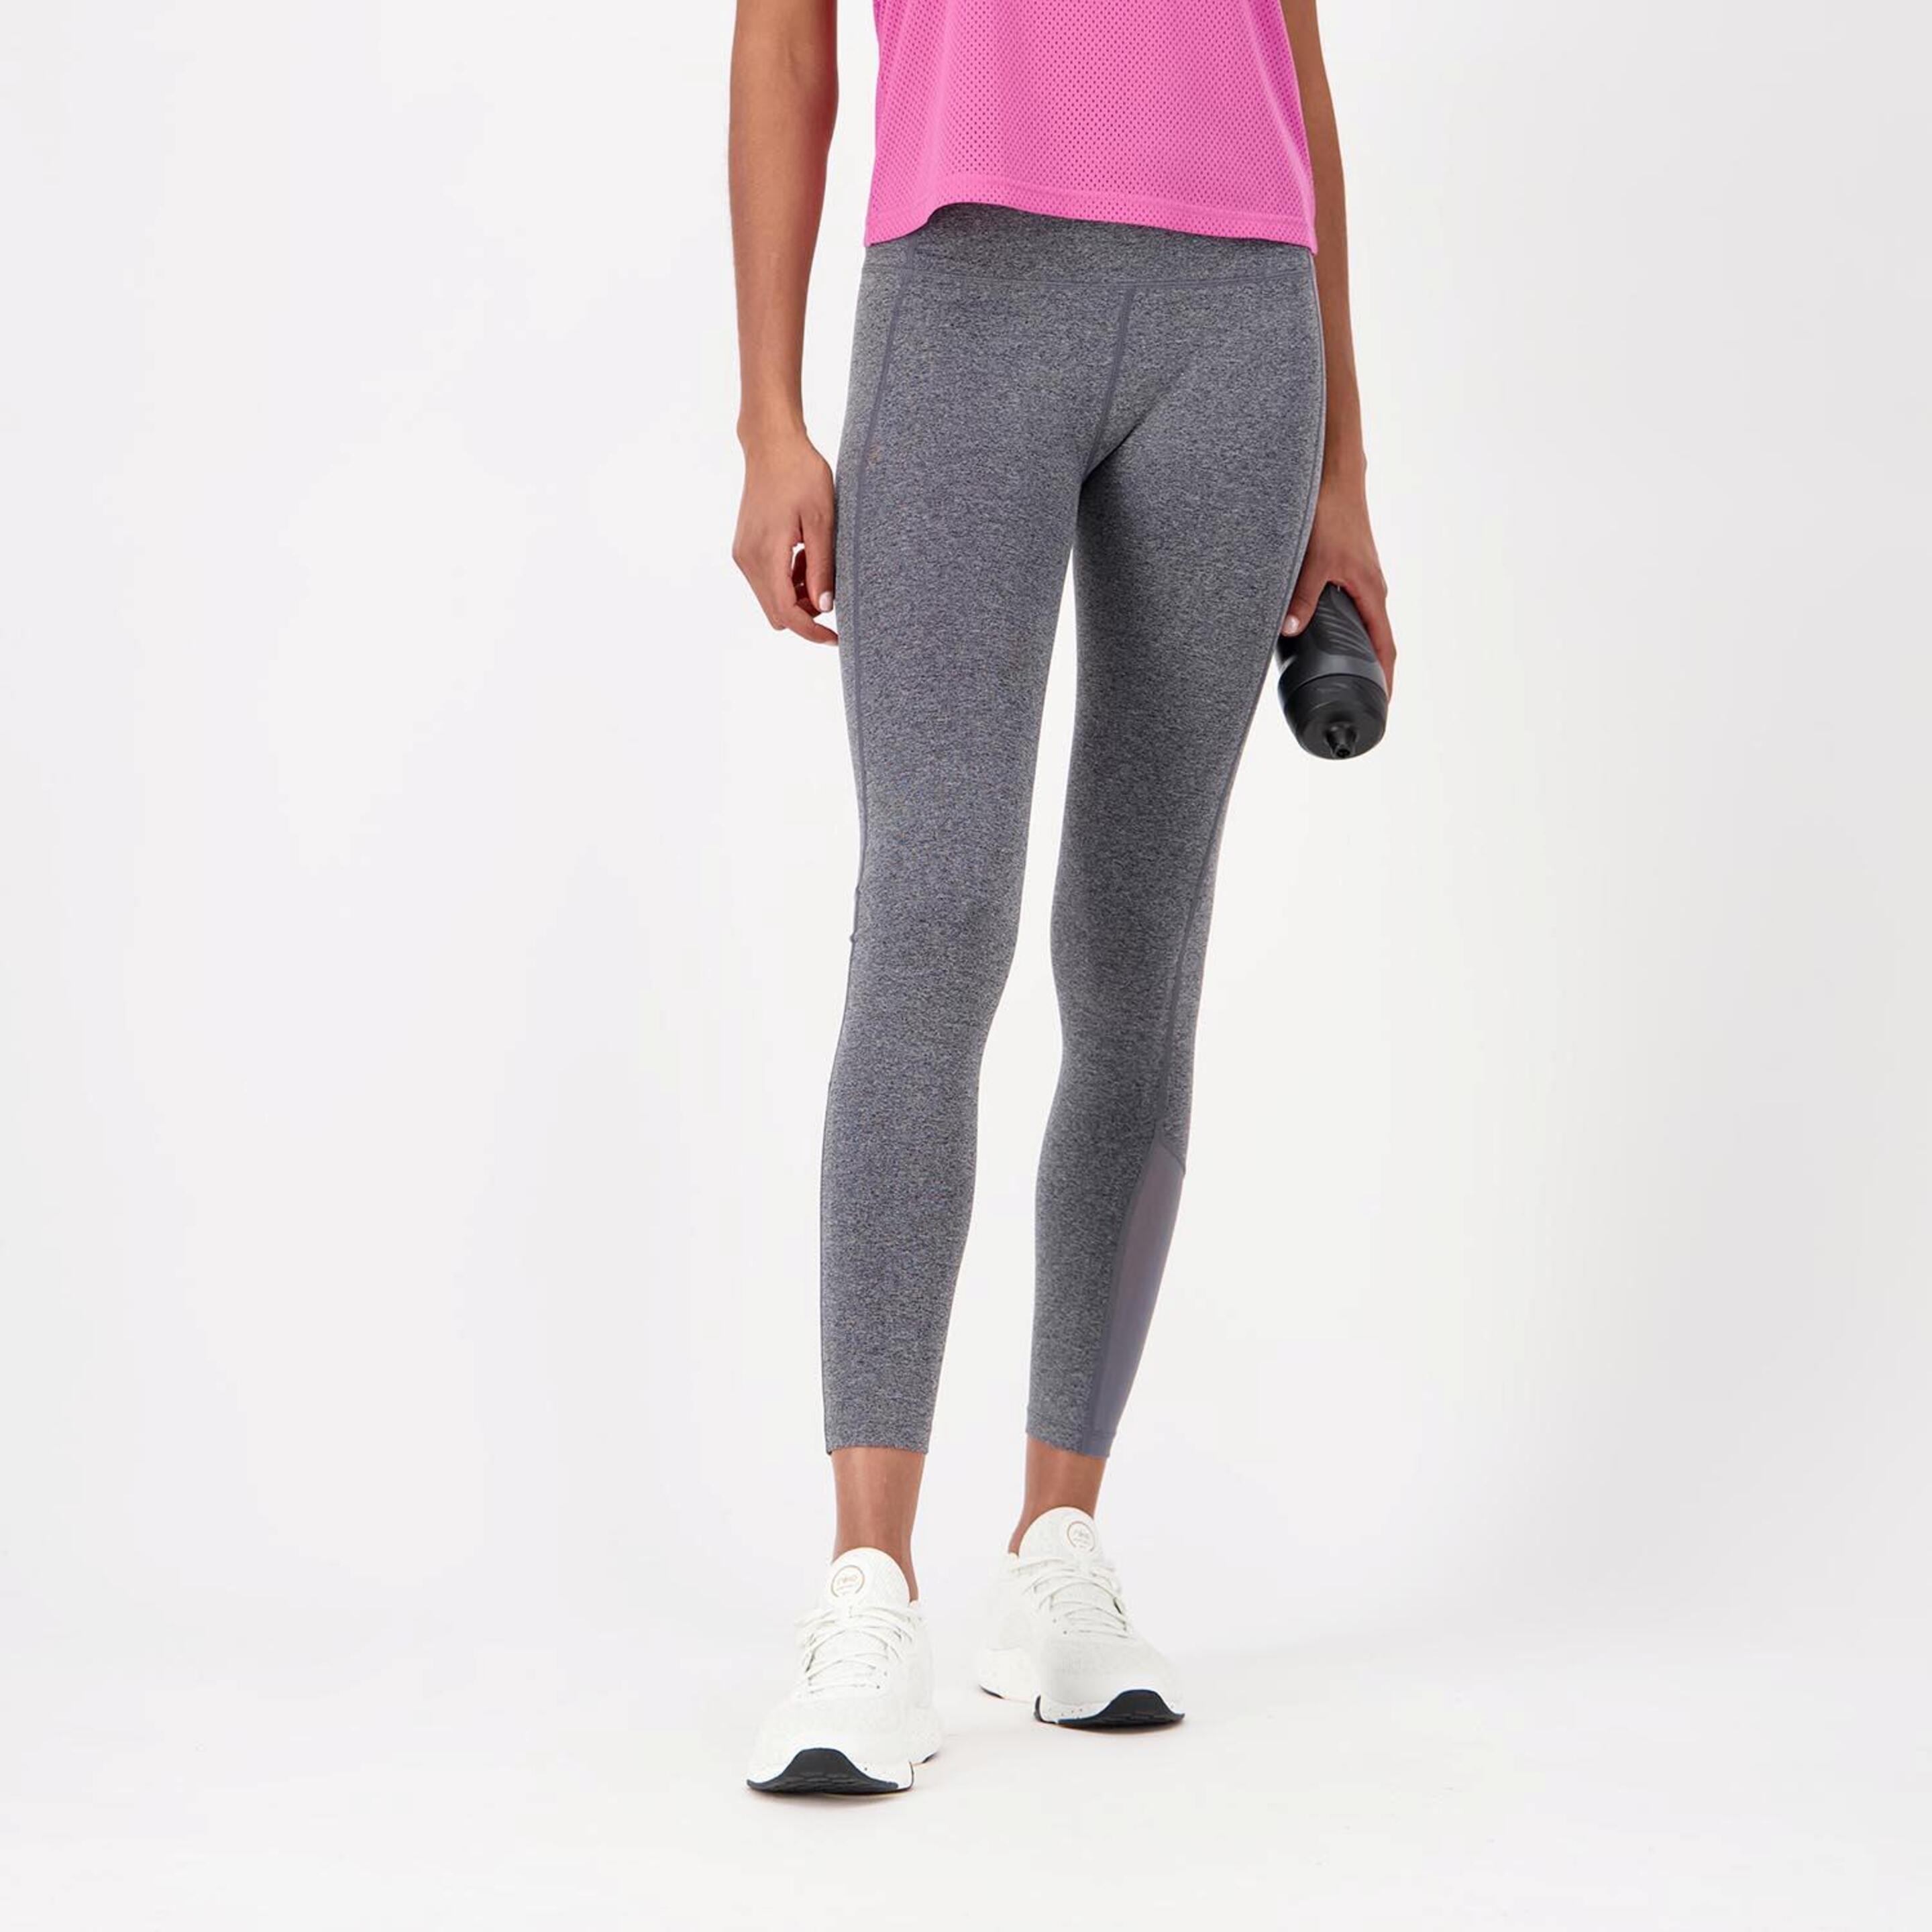 Doone Supportve - gris - Leggings Ginásio Mulher